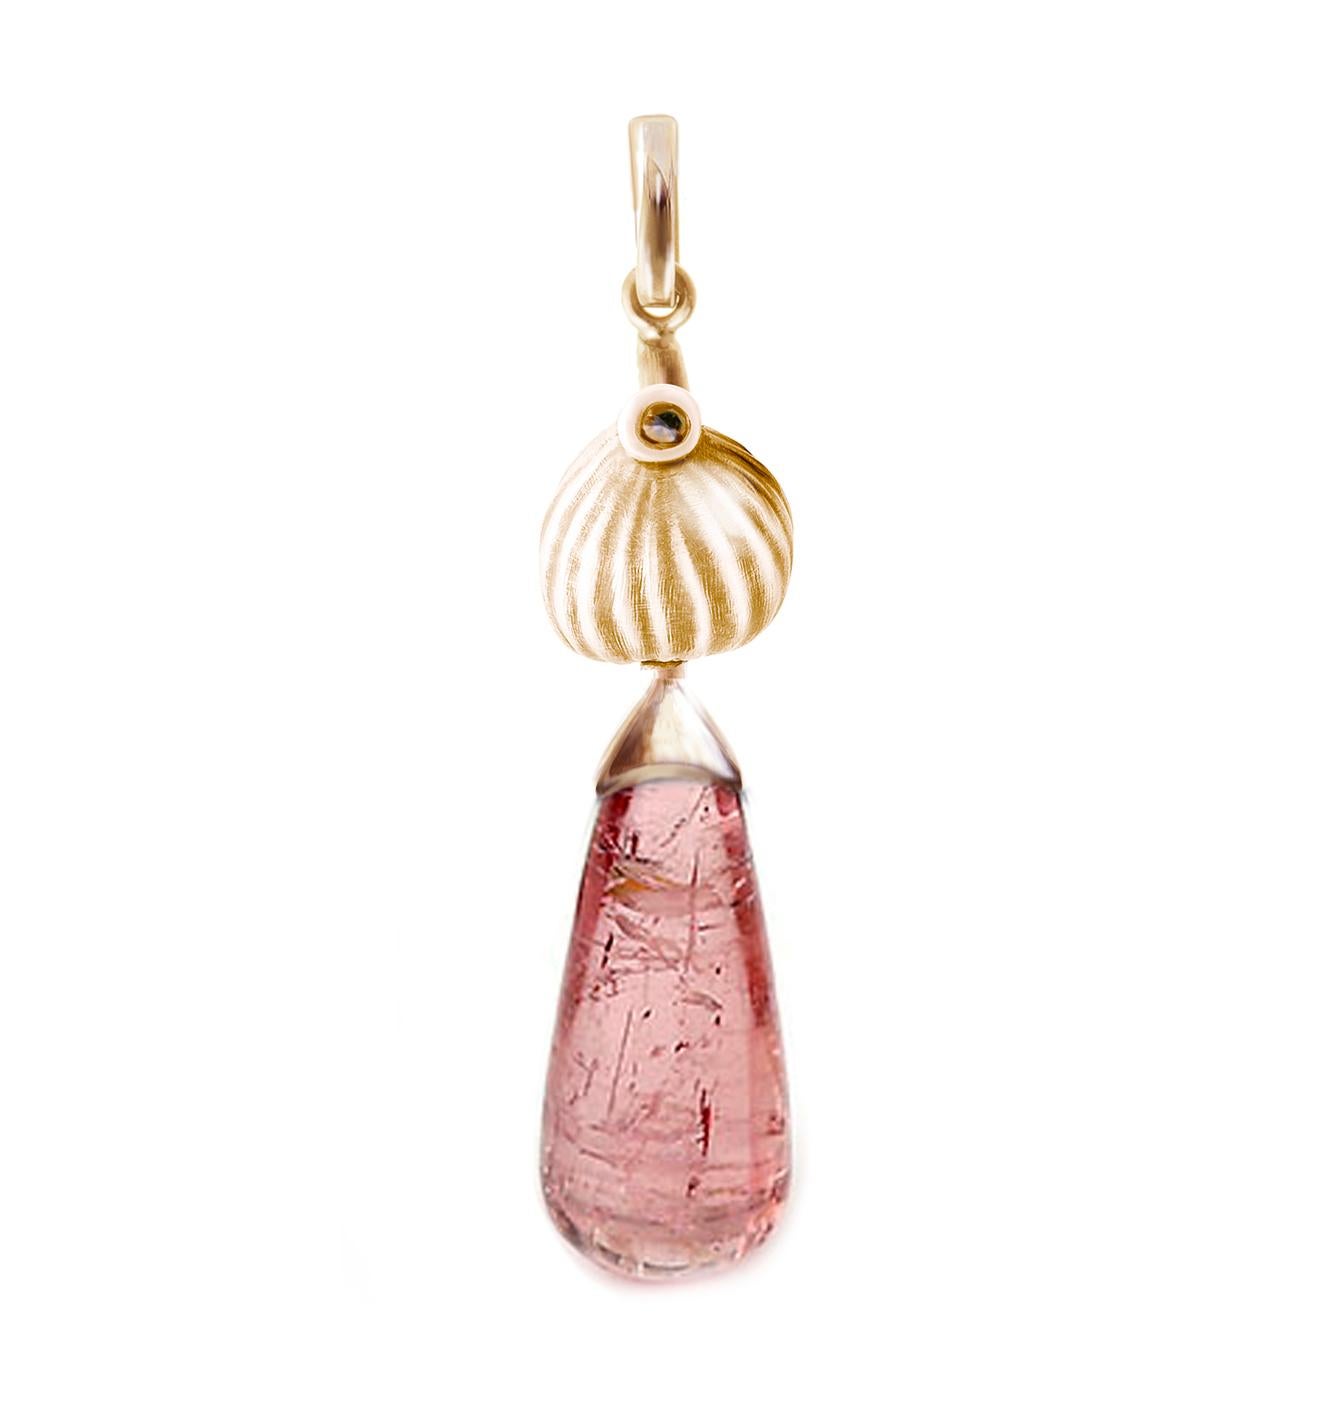 This contemporary drop brooch by the artist is made of 18 karat rose gold with a 20x8 mm (8.23 carats) natural rose tourmaline and round diamonds. The Fig collection was featured in a review by Vogue UA and was designed by the artist and oil painter